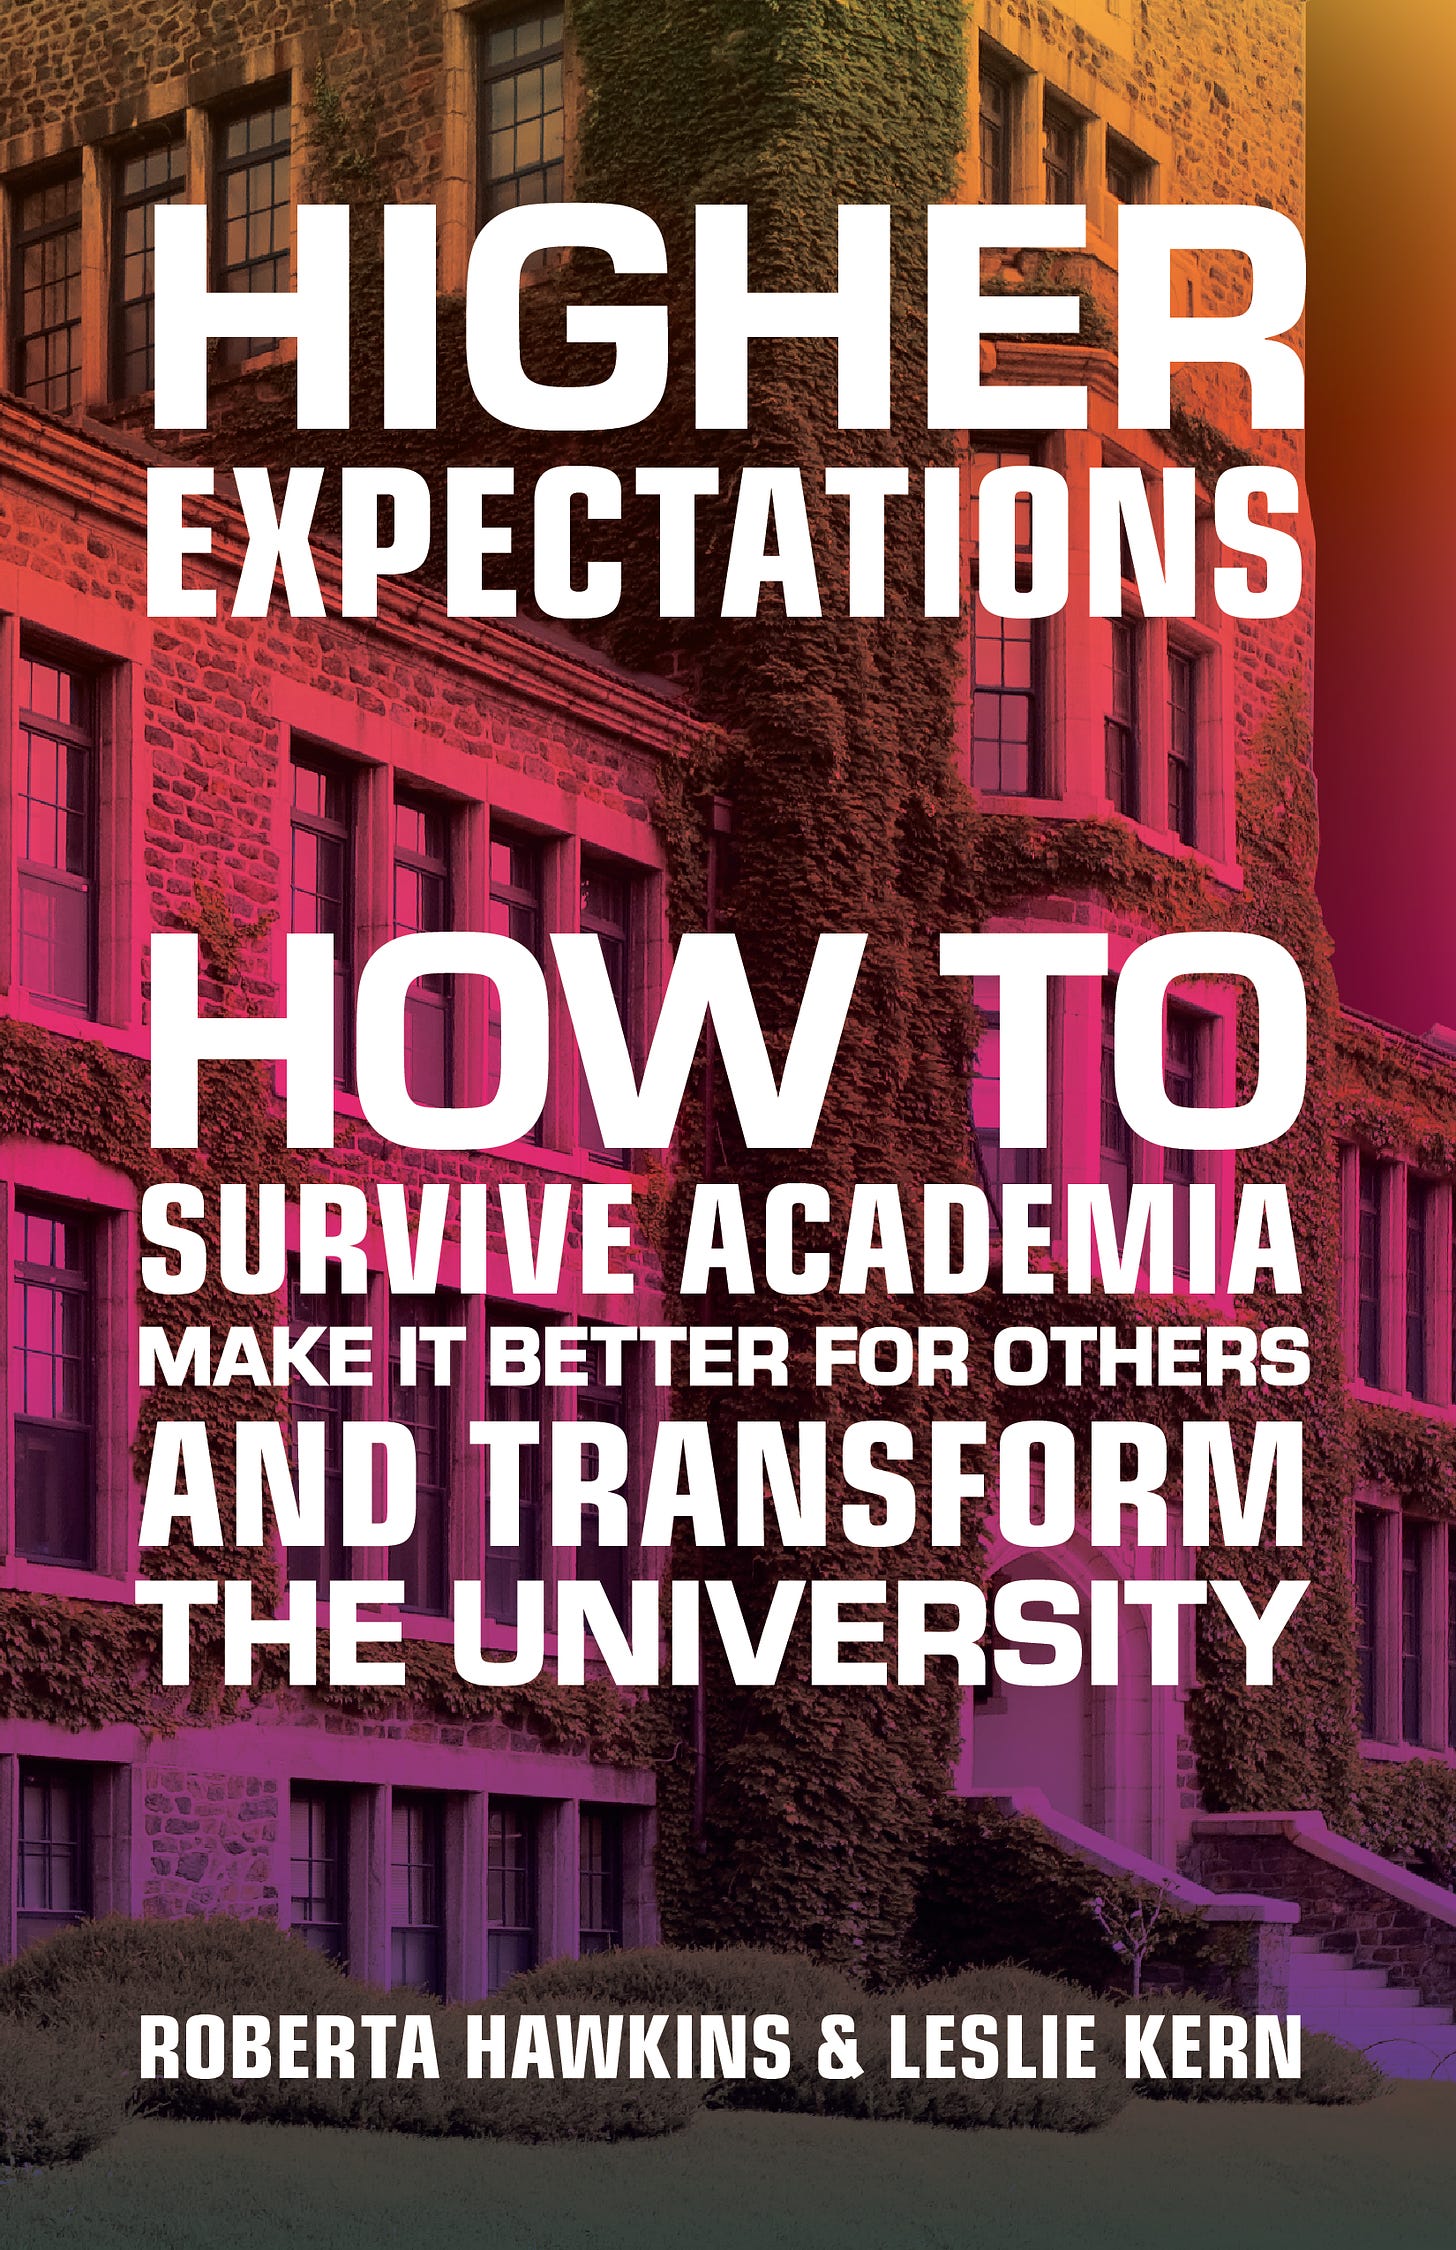 Cover image of the book Higher Expectations: How to Survive Academia, Make it Better for Others, and Transform the University.